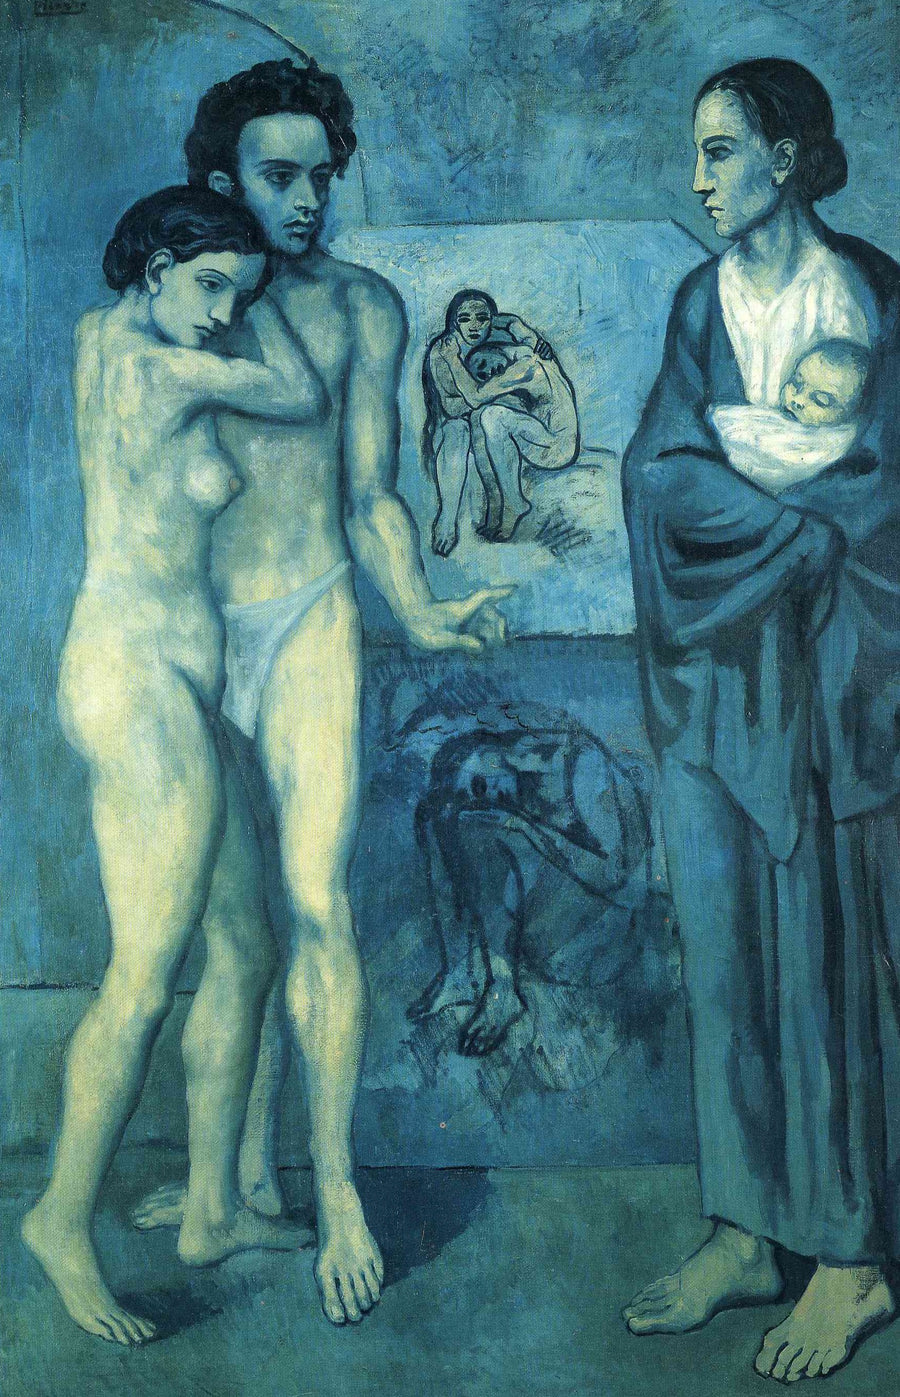 La Vie. Life by Pablo Picasso. Picasso artworks, Picasso wall art, Picasso canvas art, Picasso reproduction for sale, Picasso oil painting on canvas, Blue Surf Art